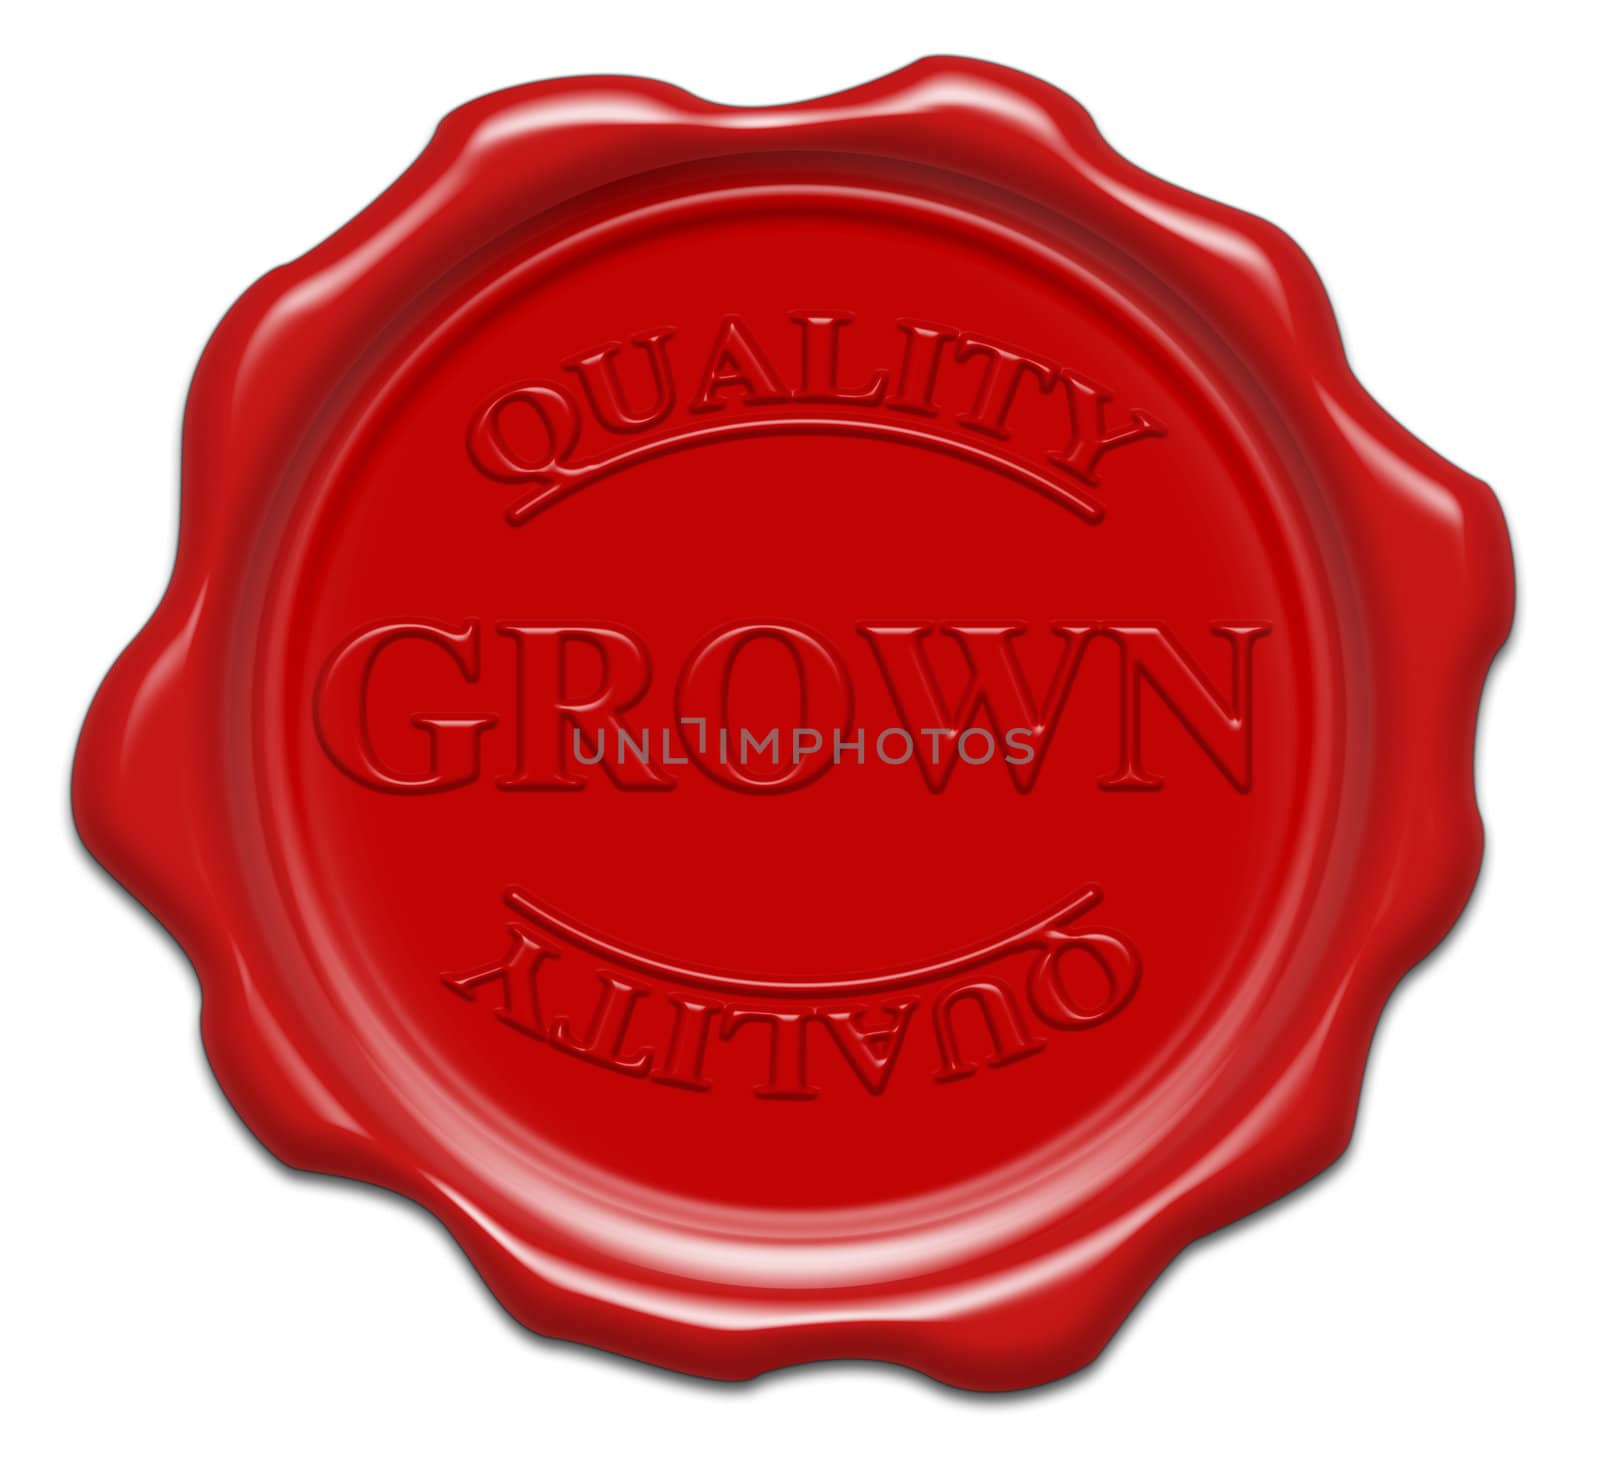 quality grown - illustration red wax seal isolated on white background with word : grown